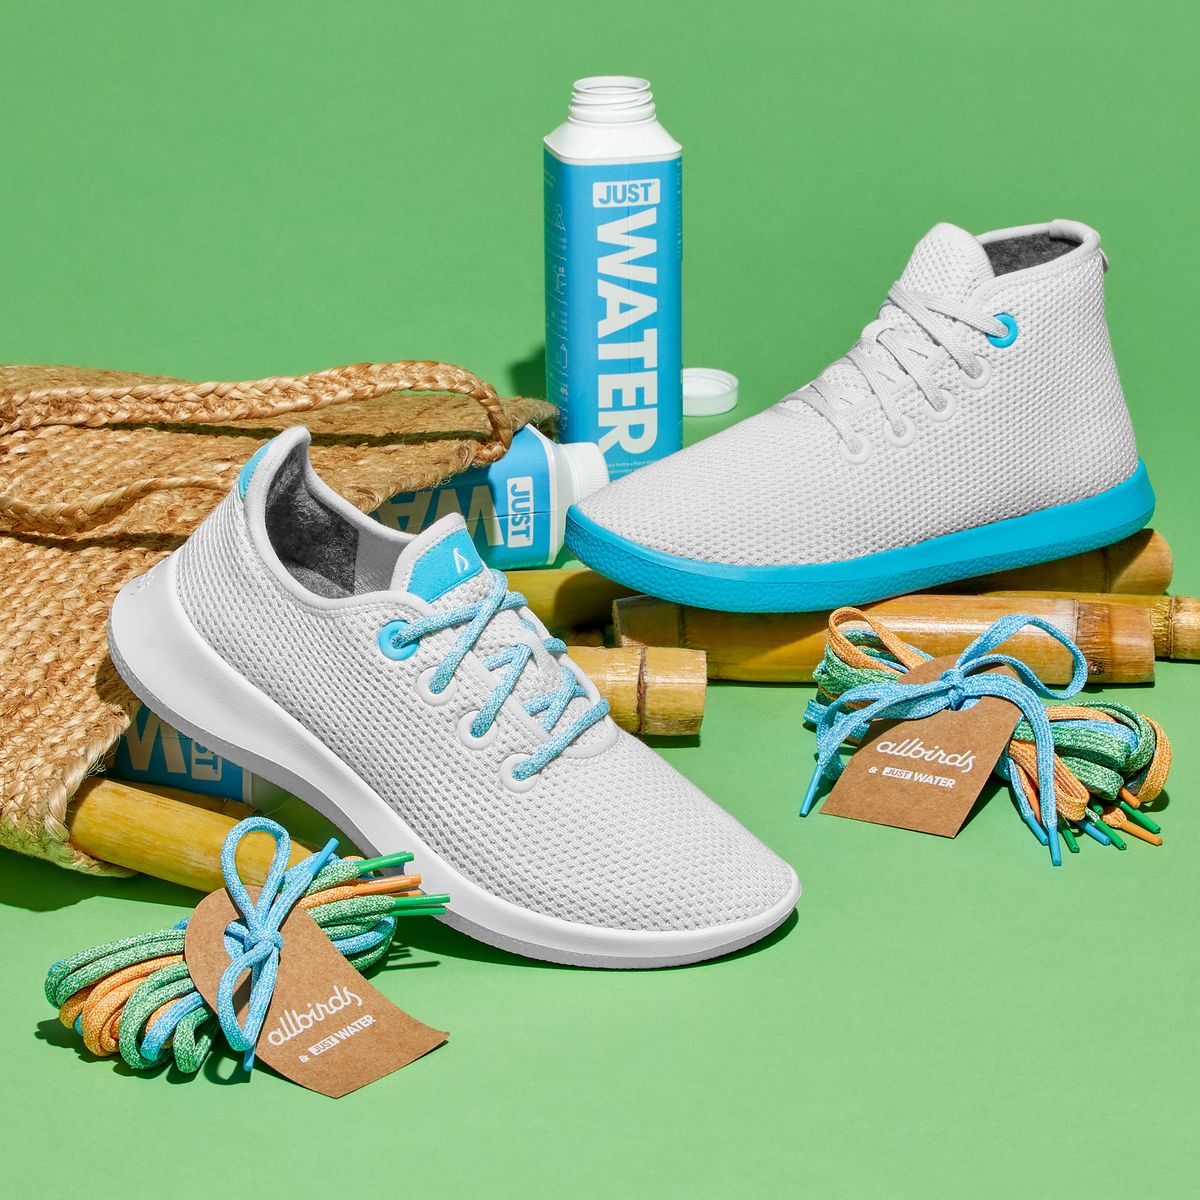 Allbirds and JUST Water Proceeds Go to Amazon Forest Fund